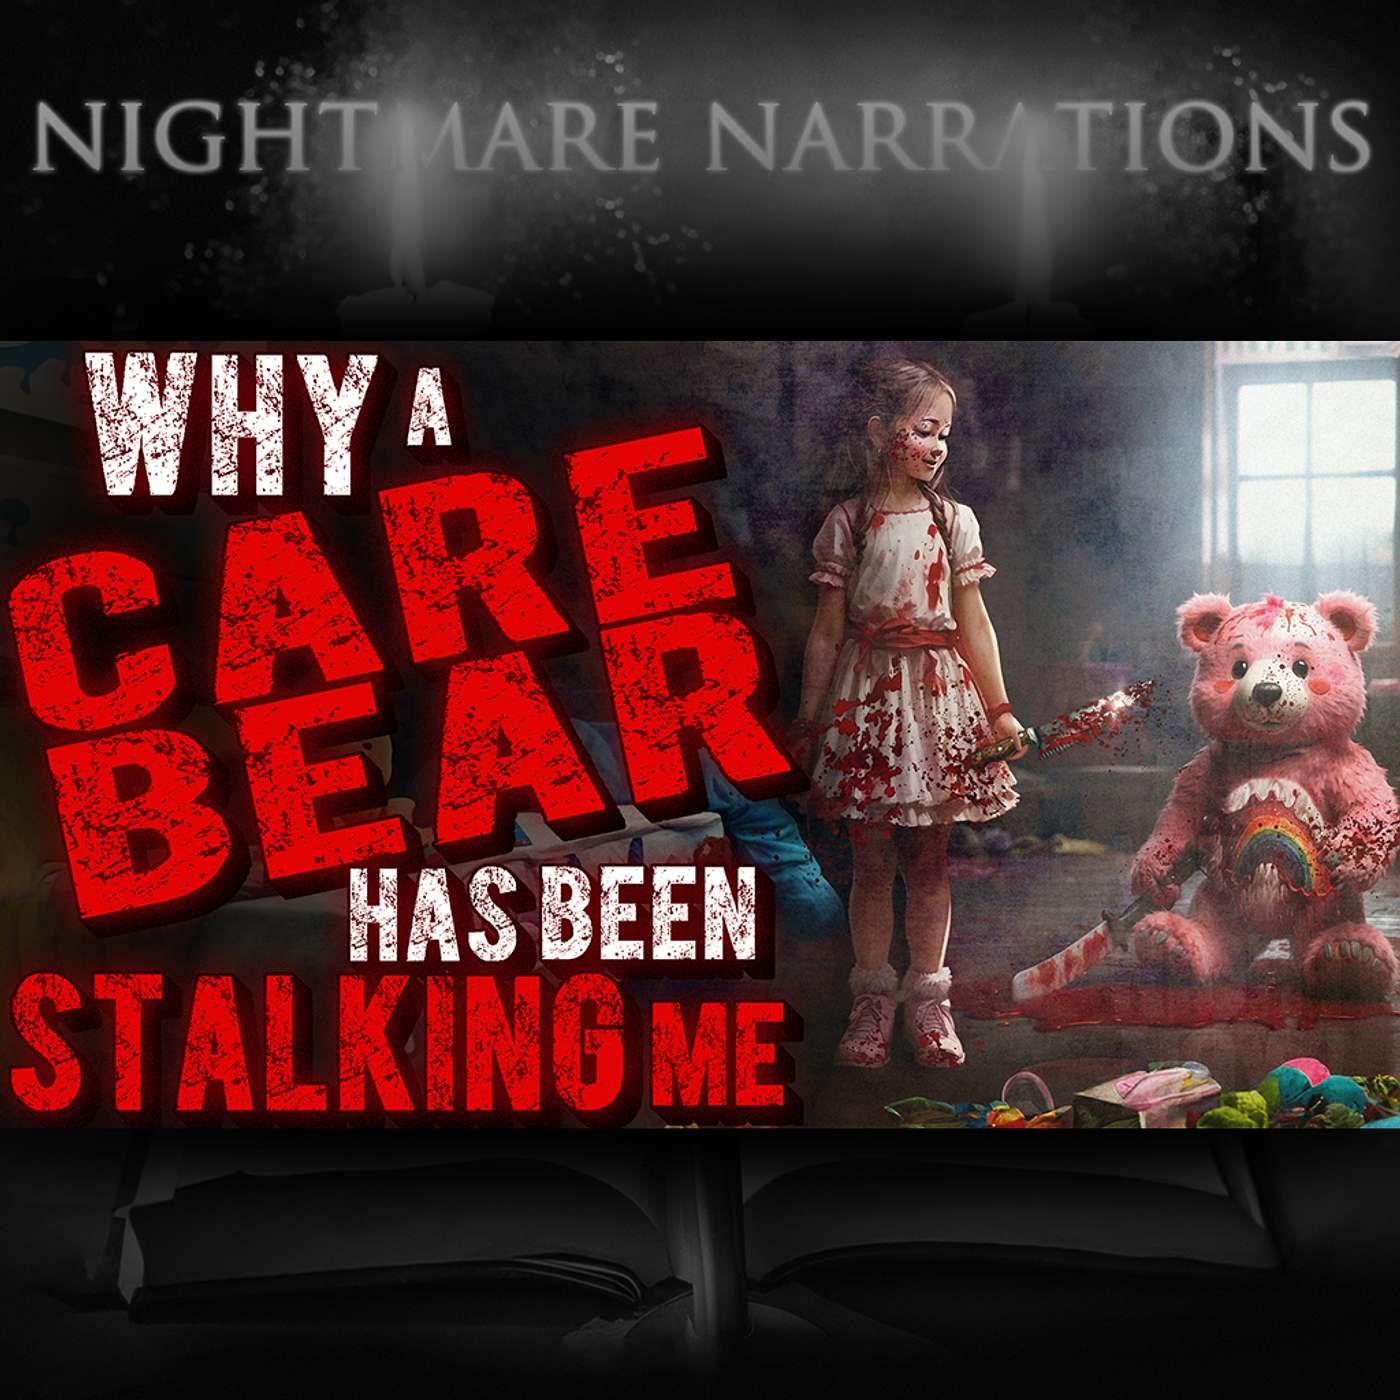 My Terrifying Encounter with a CareBear and Why It's stalking me - Scary Story - Nightmare Narration